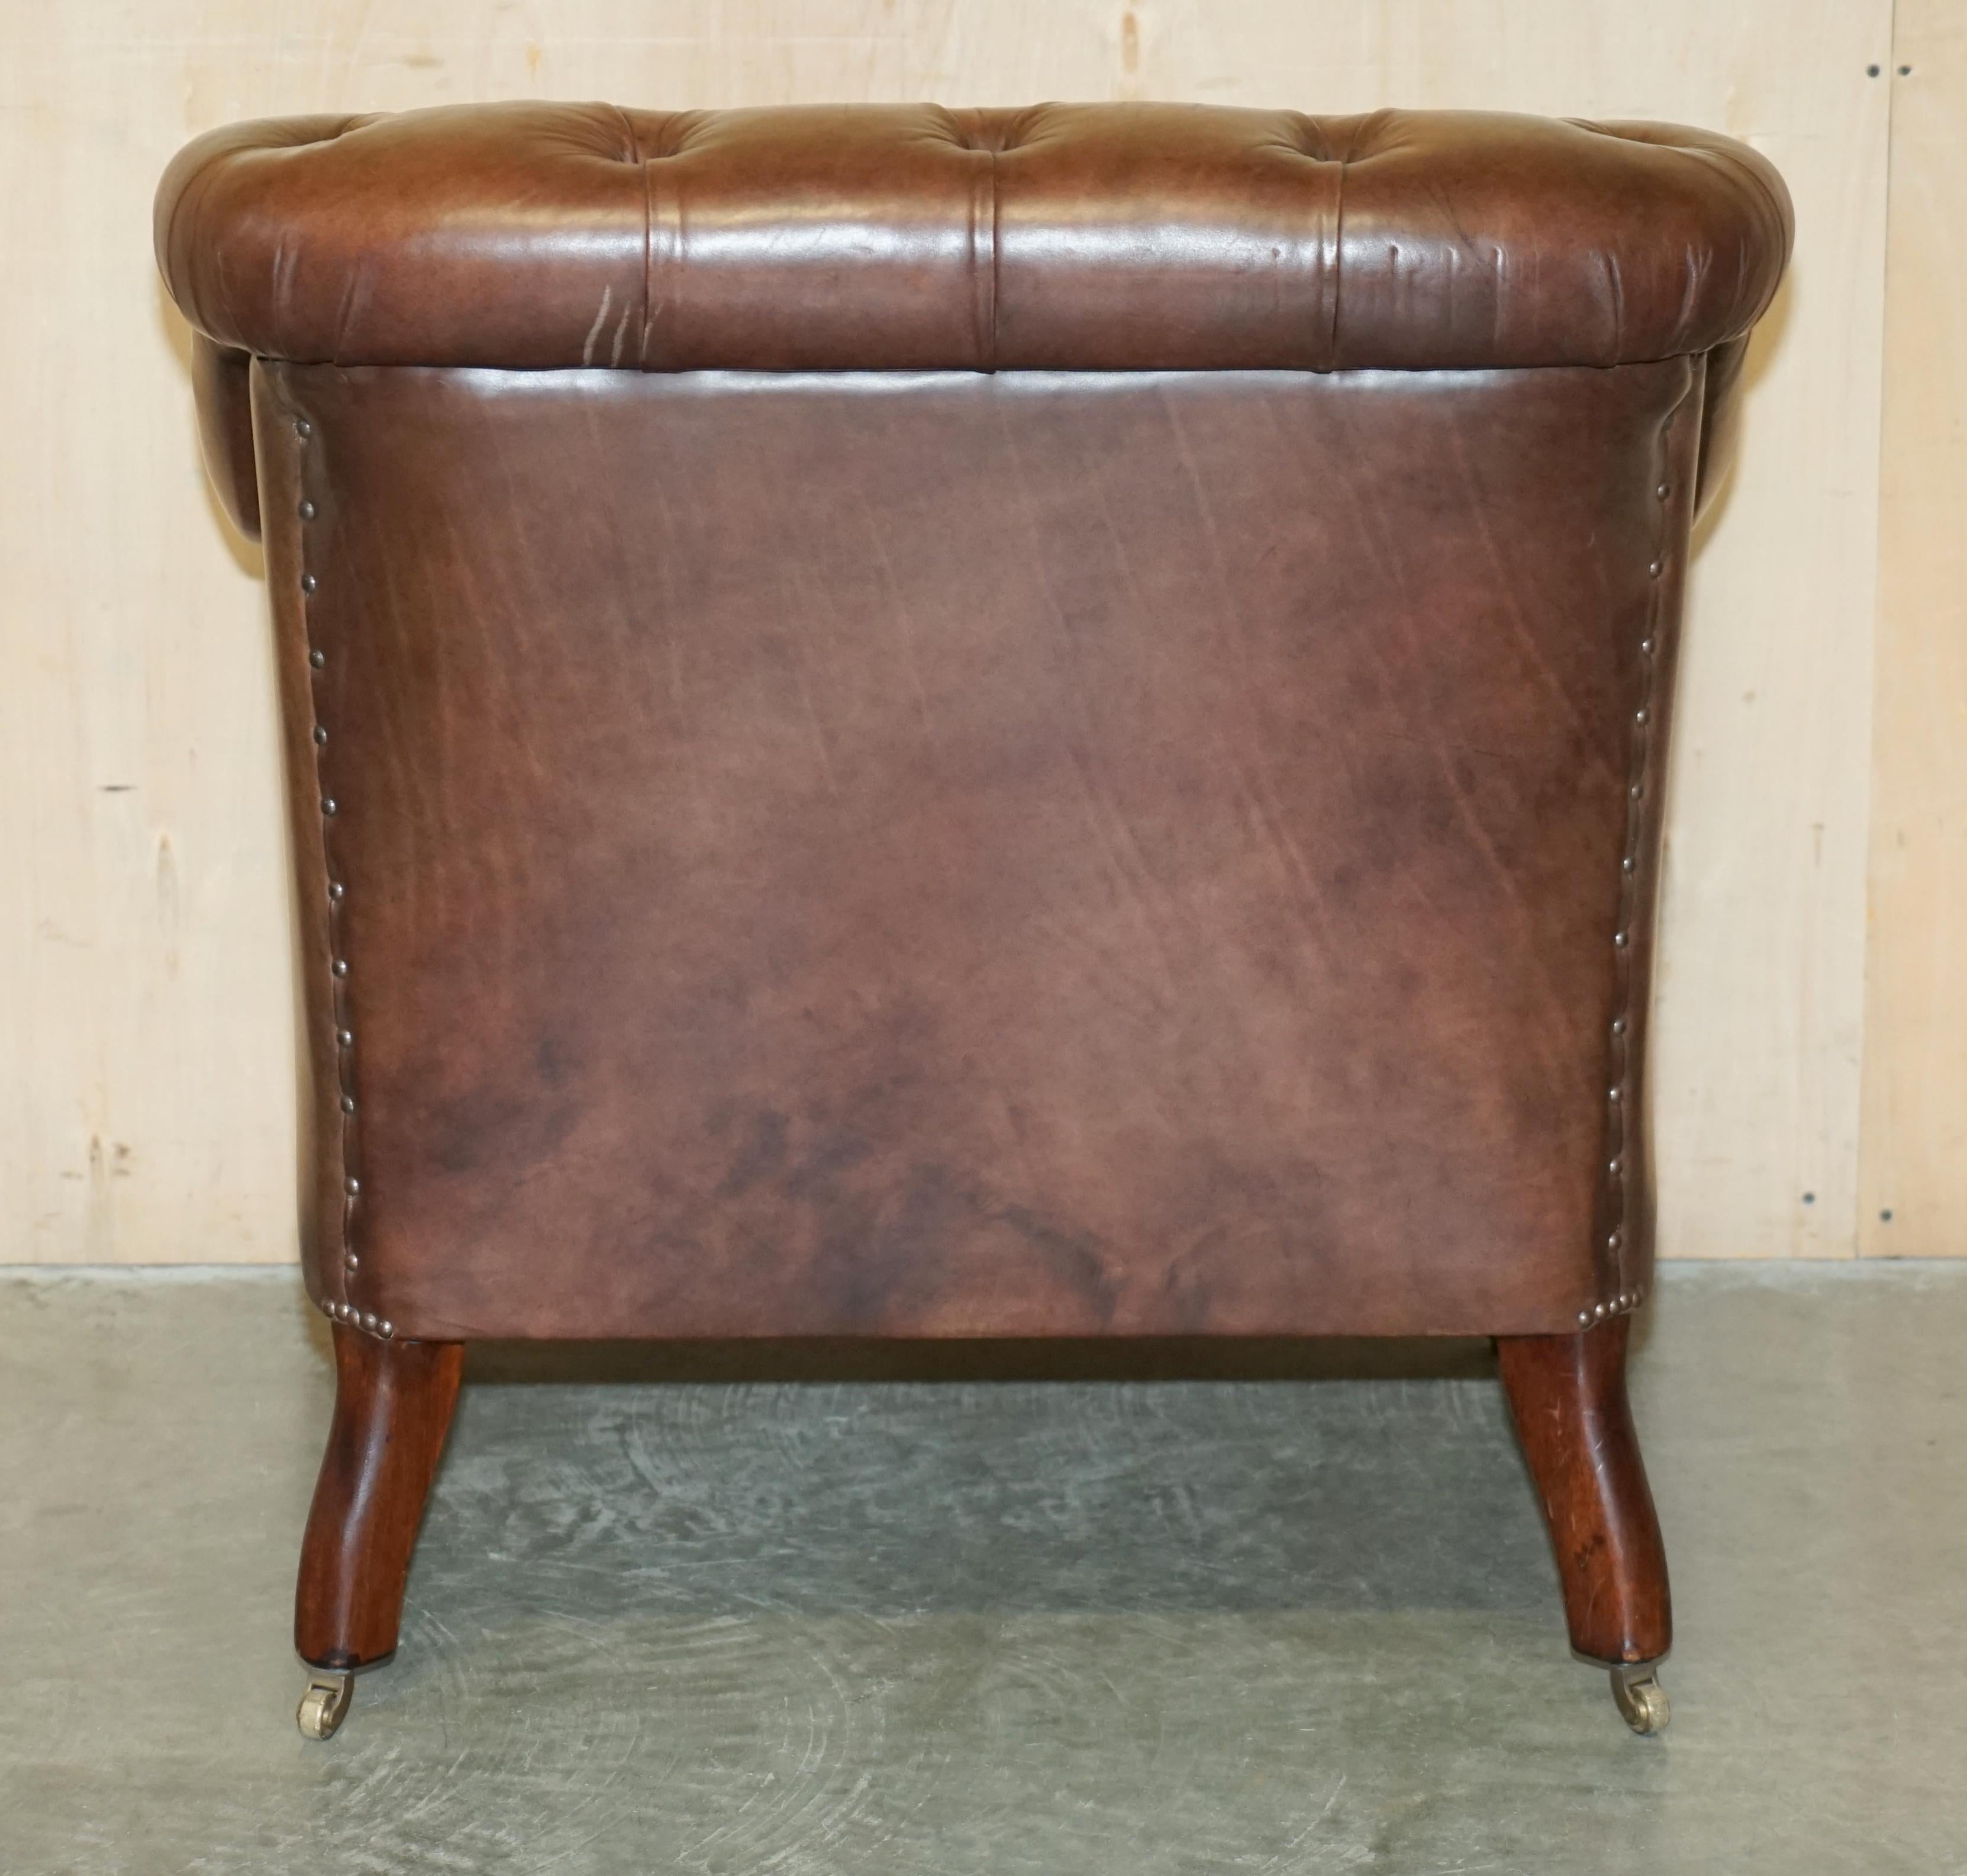  GEORGE SMiTH SOMERVILLE BROWN LEATHER CHESTERFIELD ARMCHAIR 9